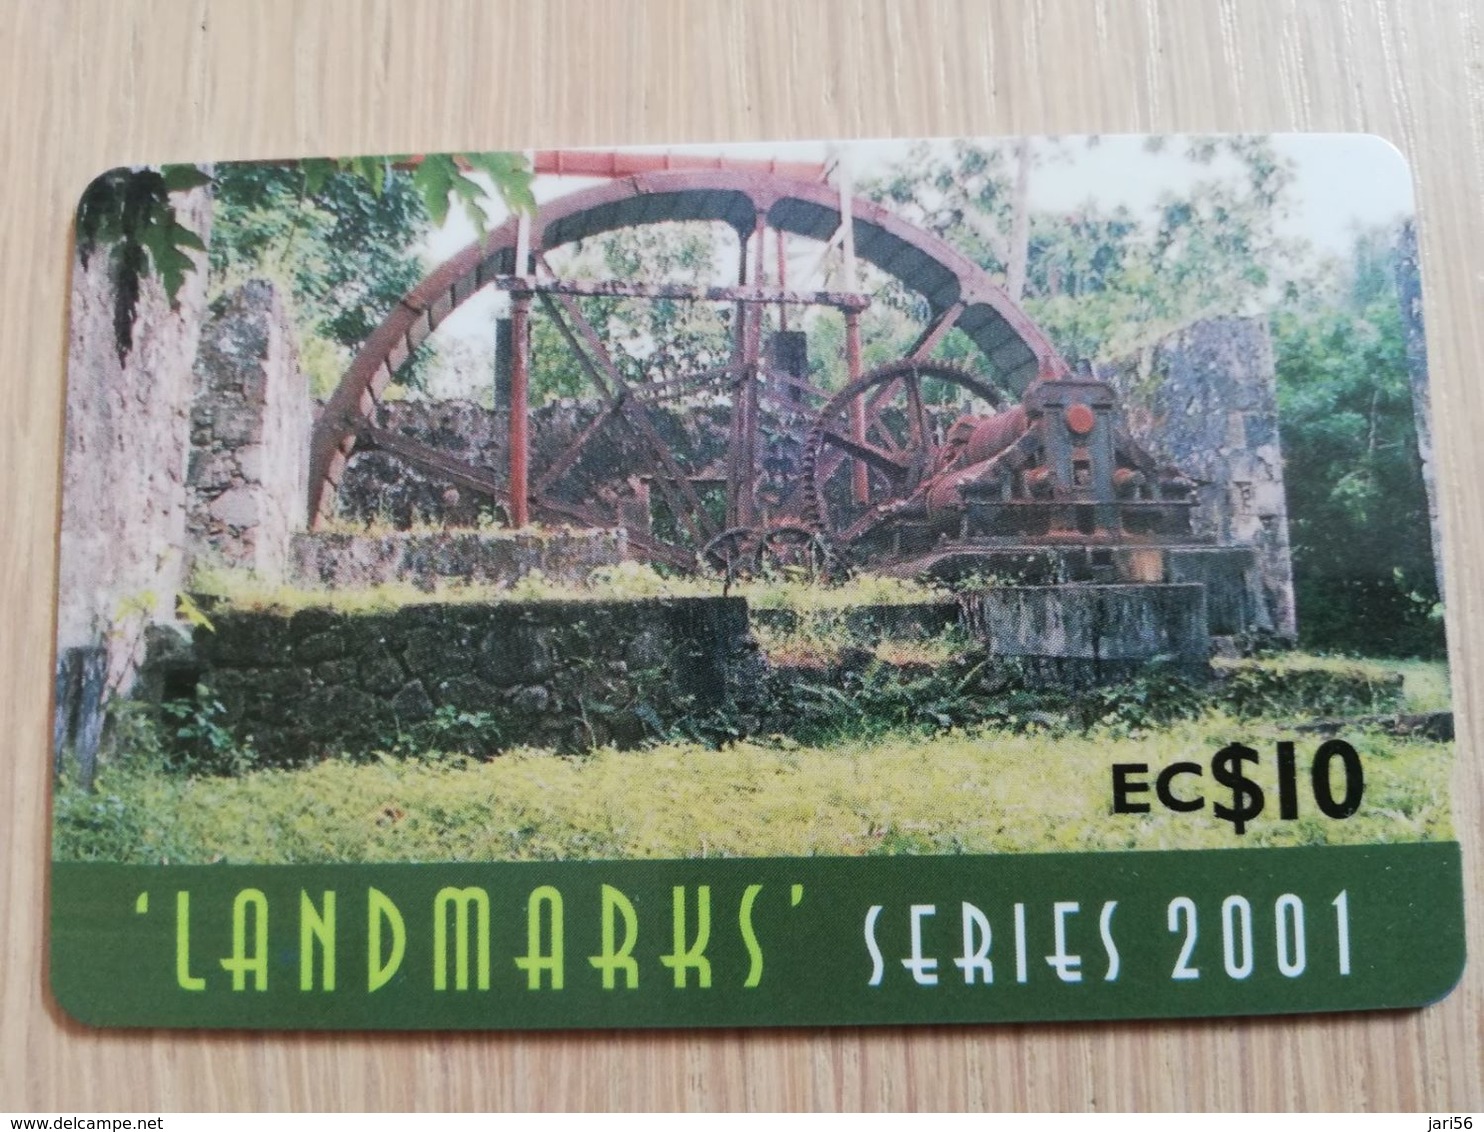 ST LUCIA    $ 10   CABLE & WIRELESS  STL-337G   337CSLG  LANDMARKS SERIES       Fine Used Card ** 2468** - Saint Lucia